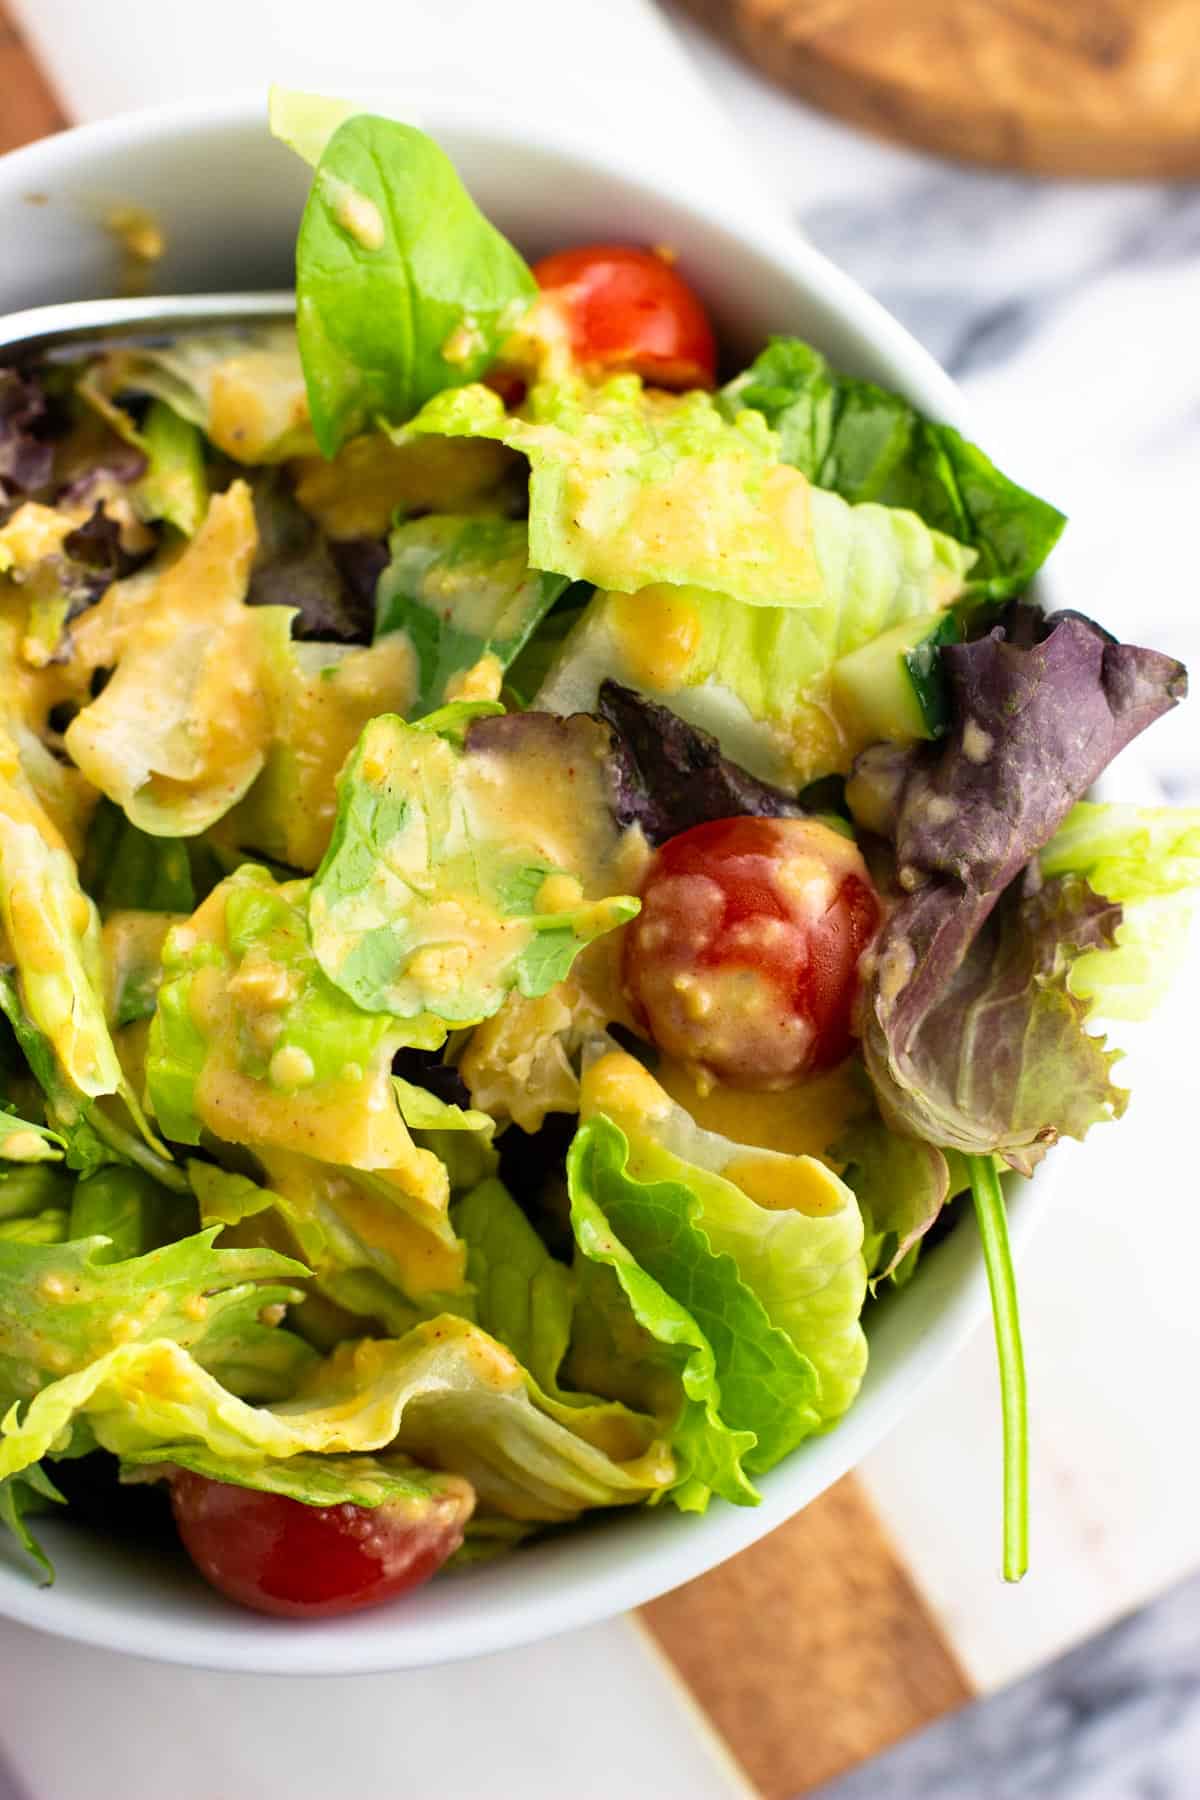 A dressed mixed green salad with tomatoes in a bowl.